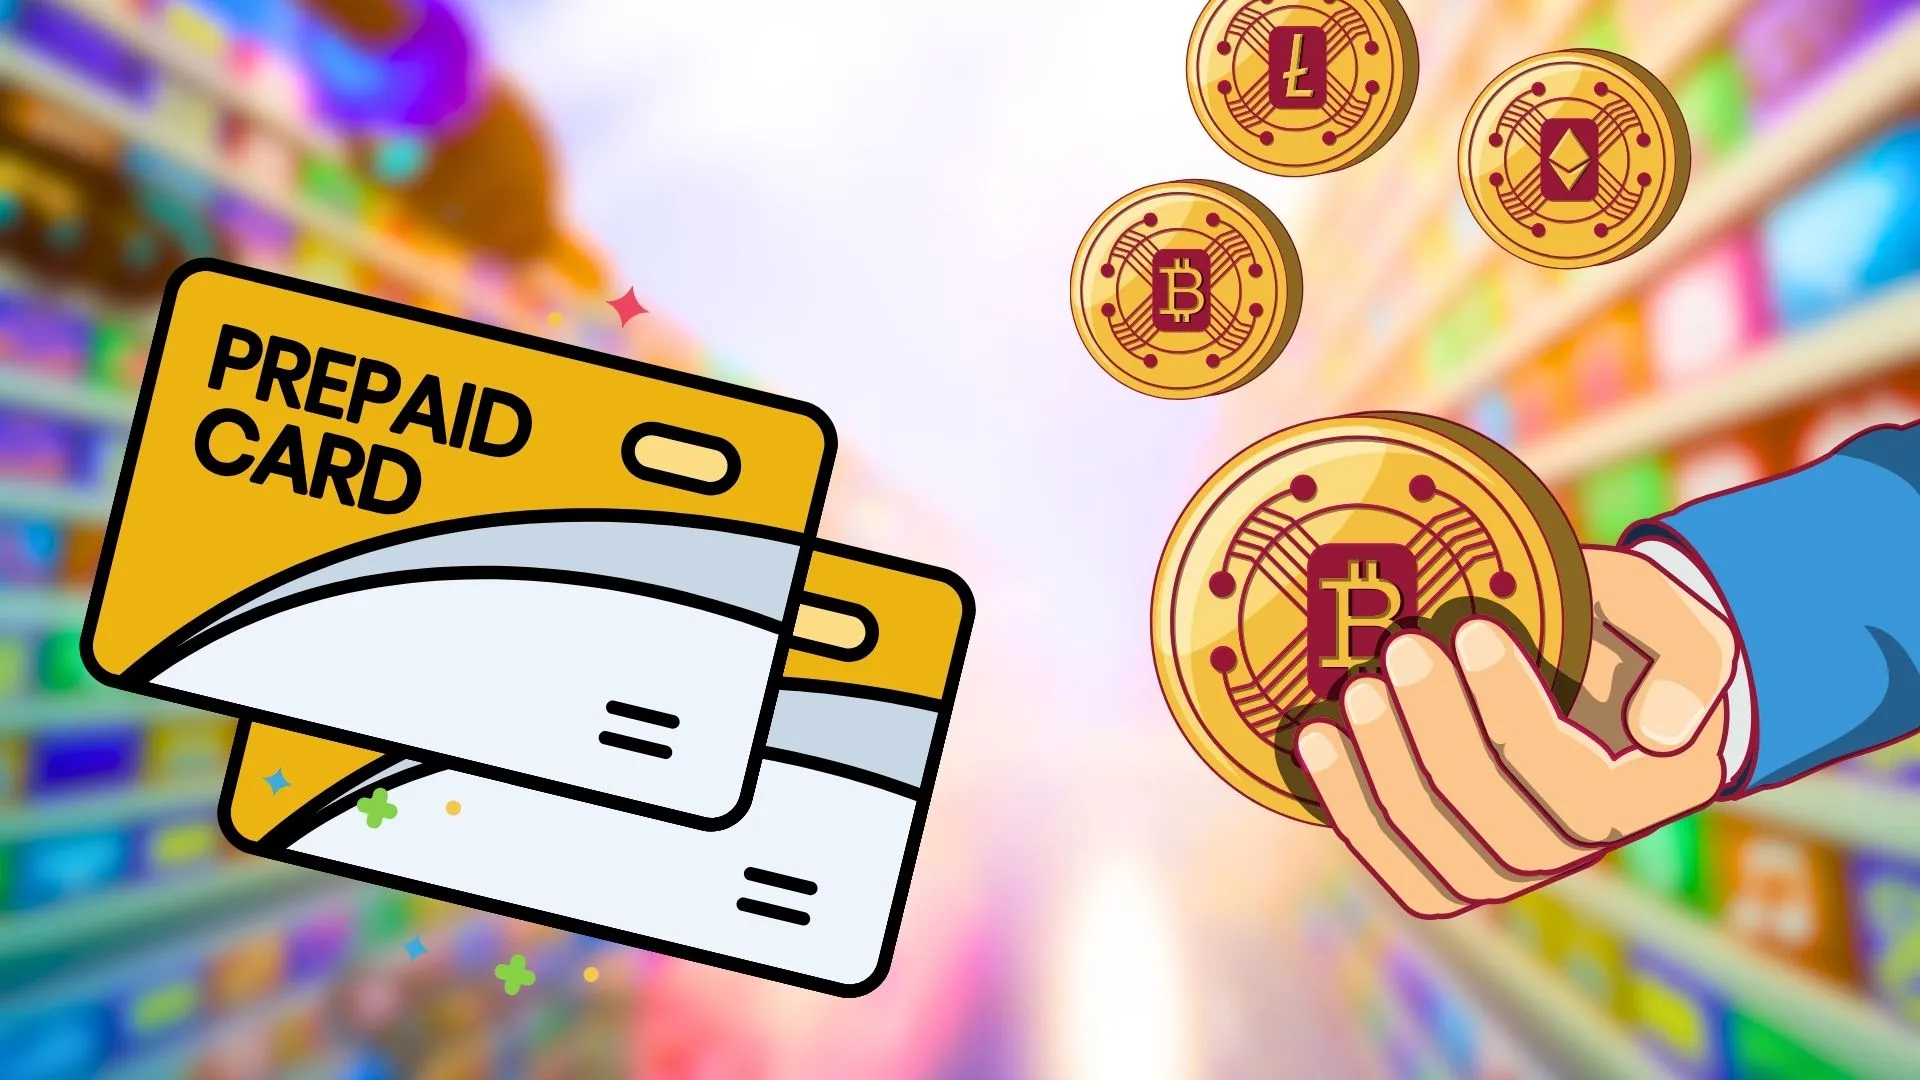 How To Buy Cryptocurrency Using A Prepaid Card: Step-By-step